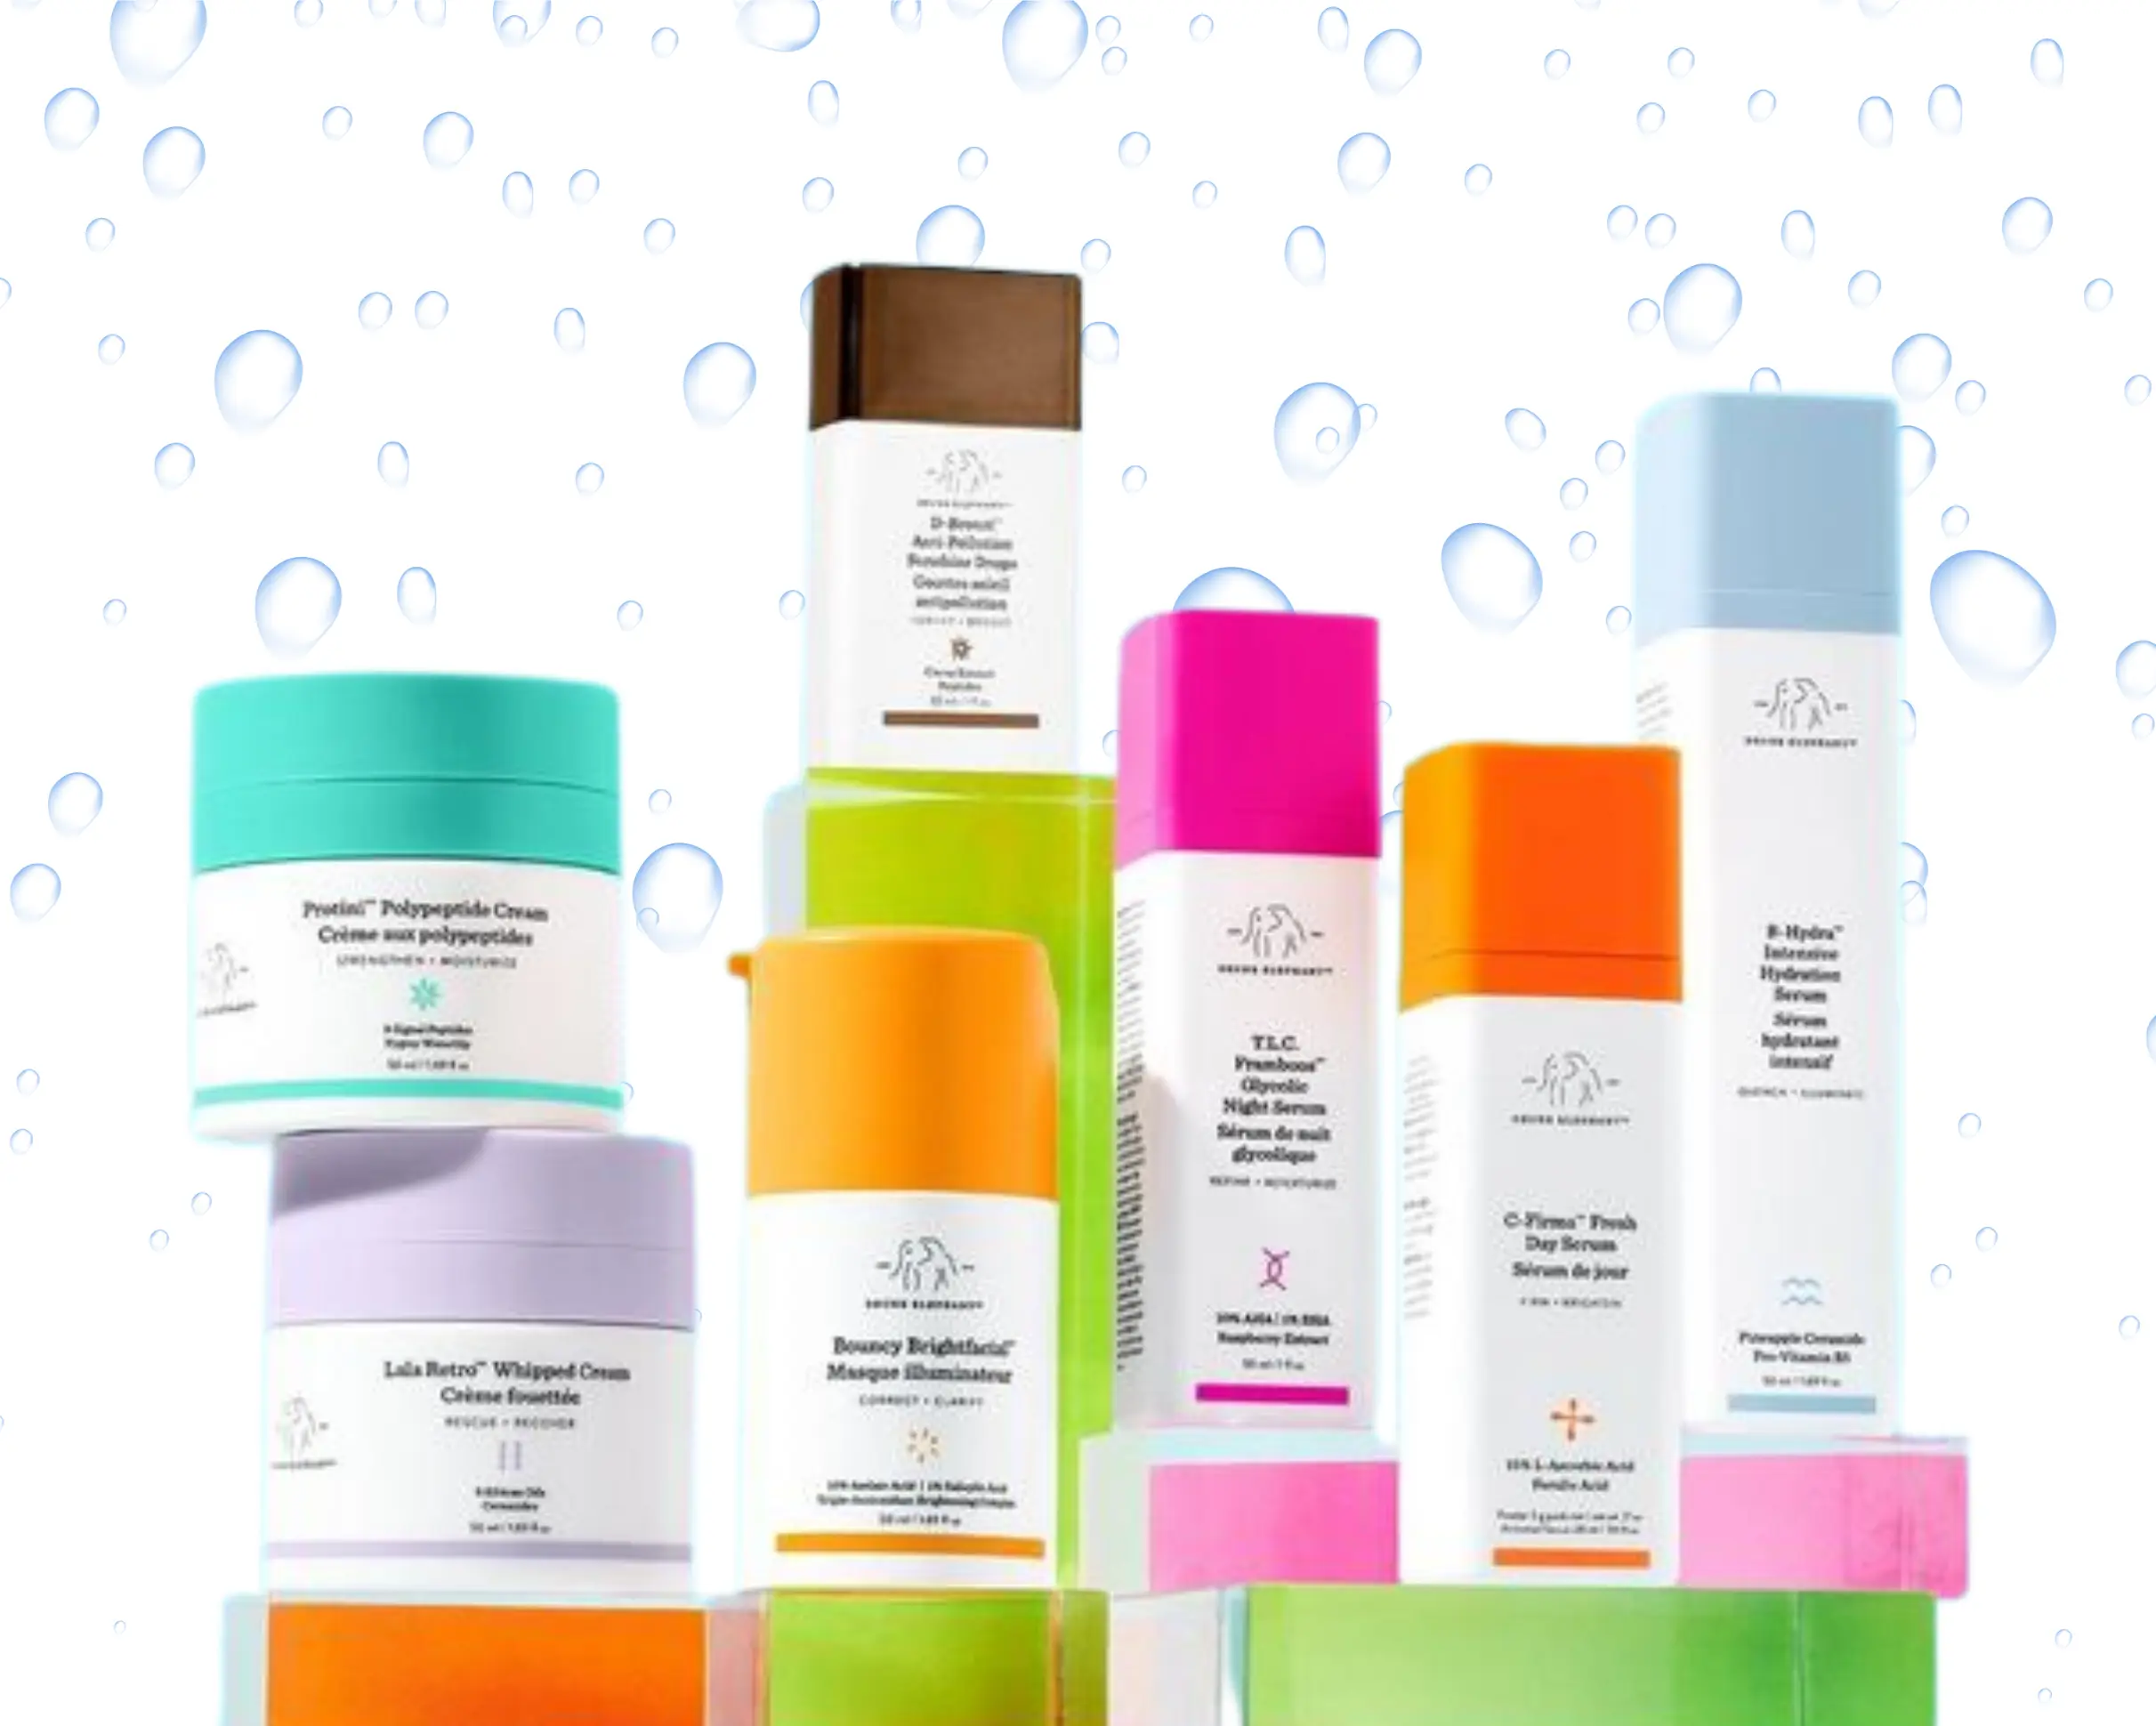 The Best Of Drunk Elephant Skincare - What Savvy Said